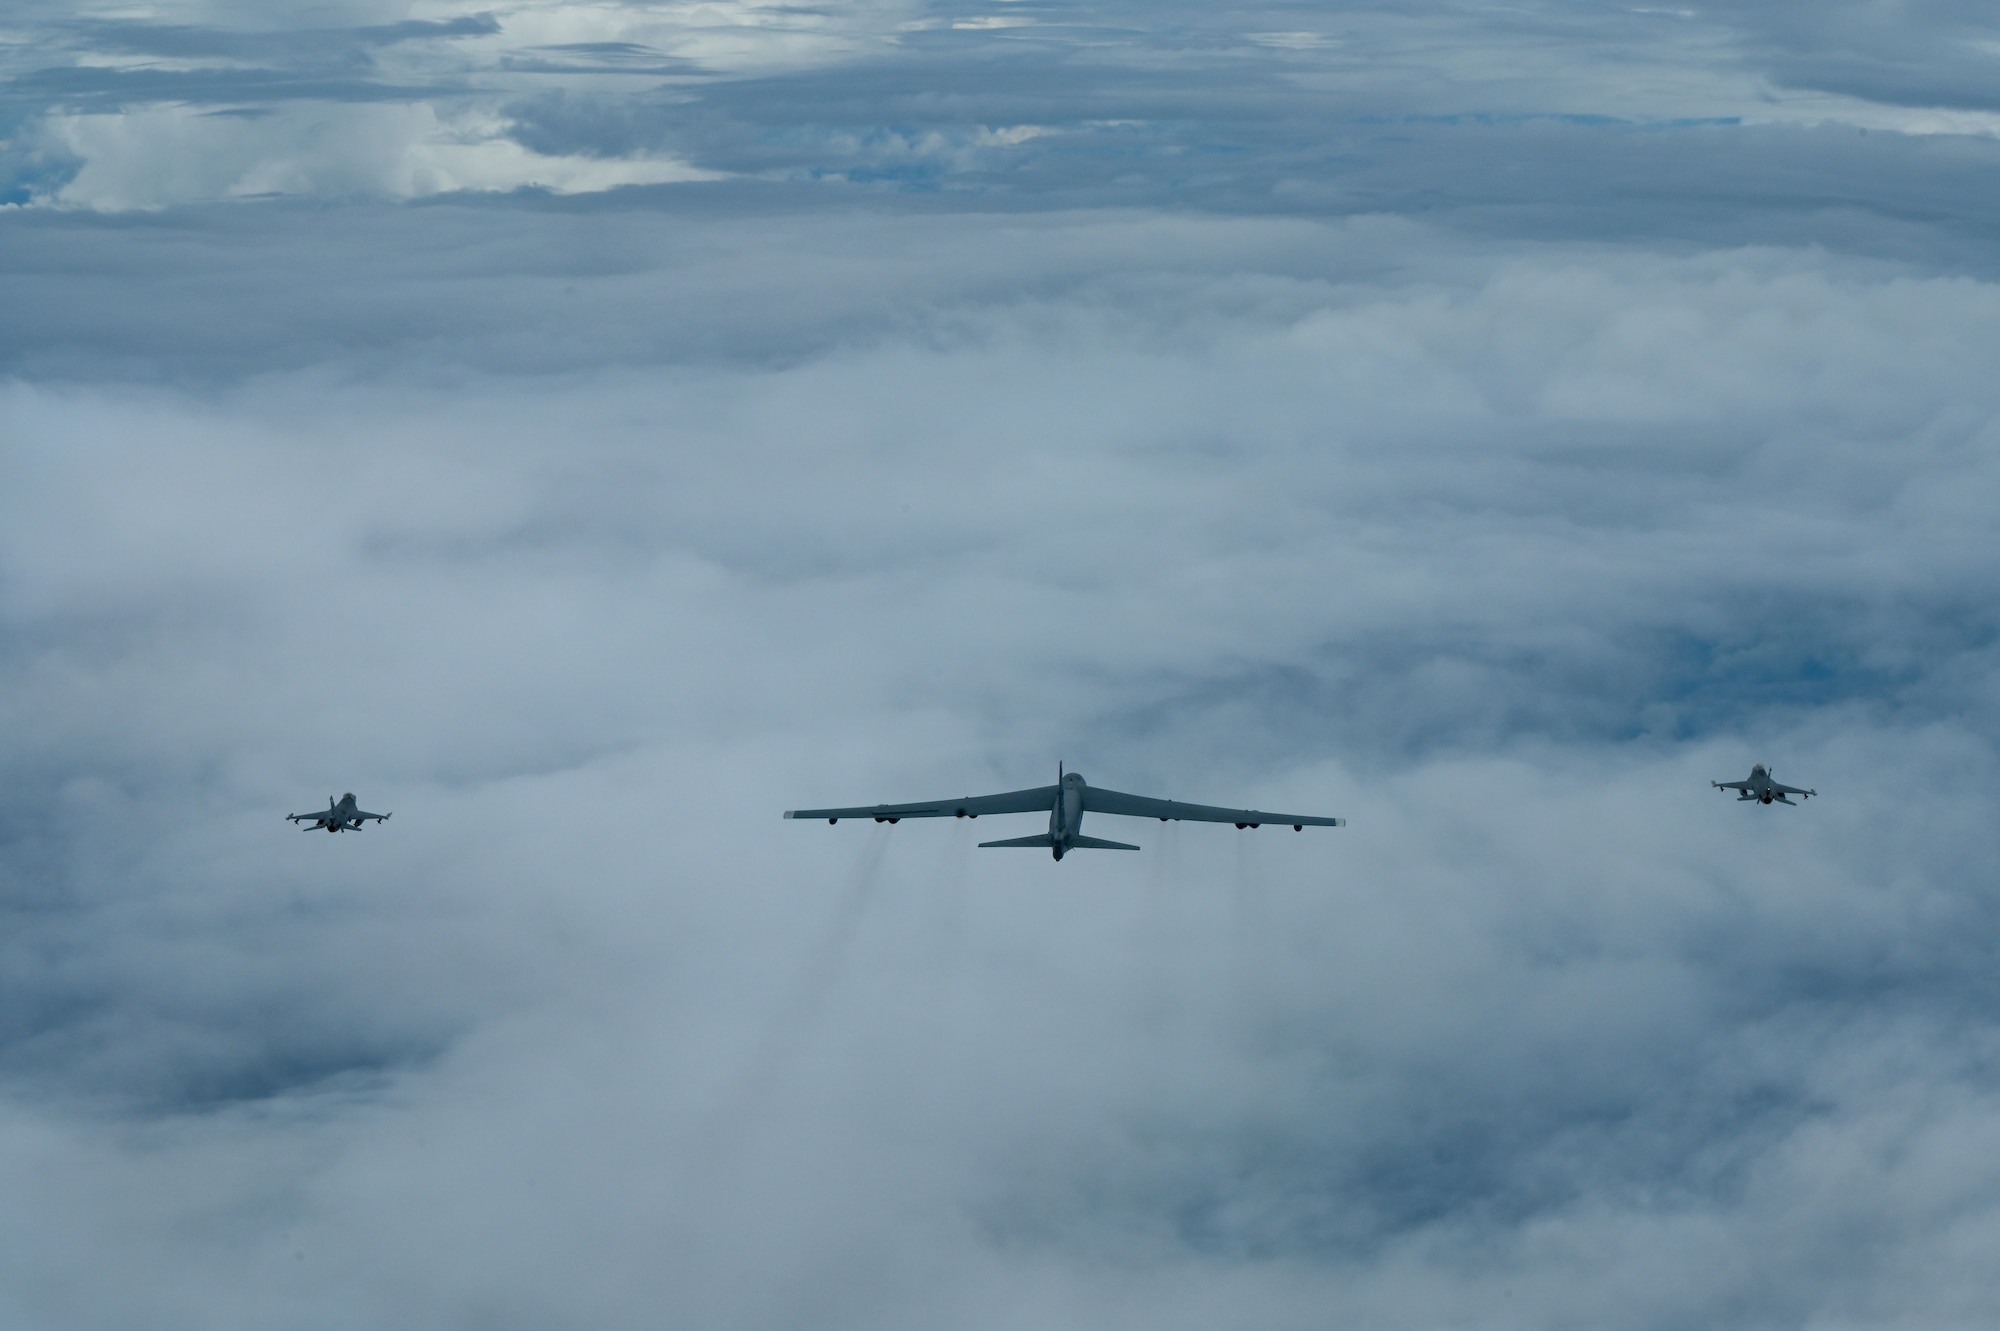 A U.S. Air Force B-52 Stratofortress assigned to the 2nd Bomb Wing, Barksdale Air Force Base, Louisiana, flies next to two Indonesian Air Force F-16s during a Bomber Task Force (BTF) deployment in the Indo-Pacific region, Sept. 1, 2021. This is the first time a B-52 has integrated with the Indonesian Air Force during flight. BTF missions demonstrate the credibility of our forces to address a diverse and uncertain security environment. (U.S. Air Force photo by Tech. Sgt. Matthew Lotz)